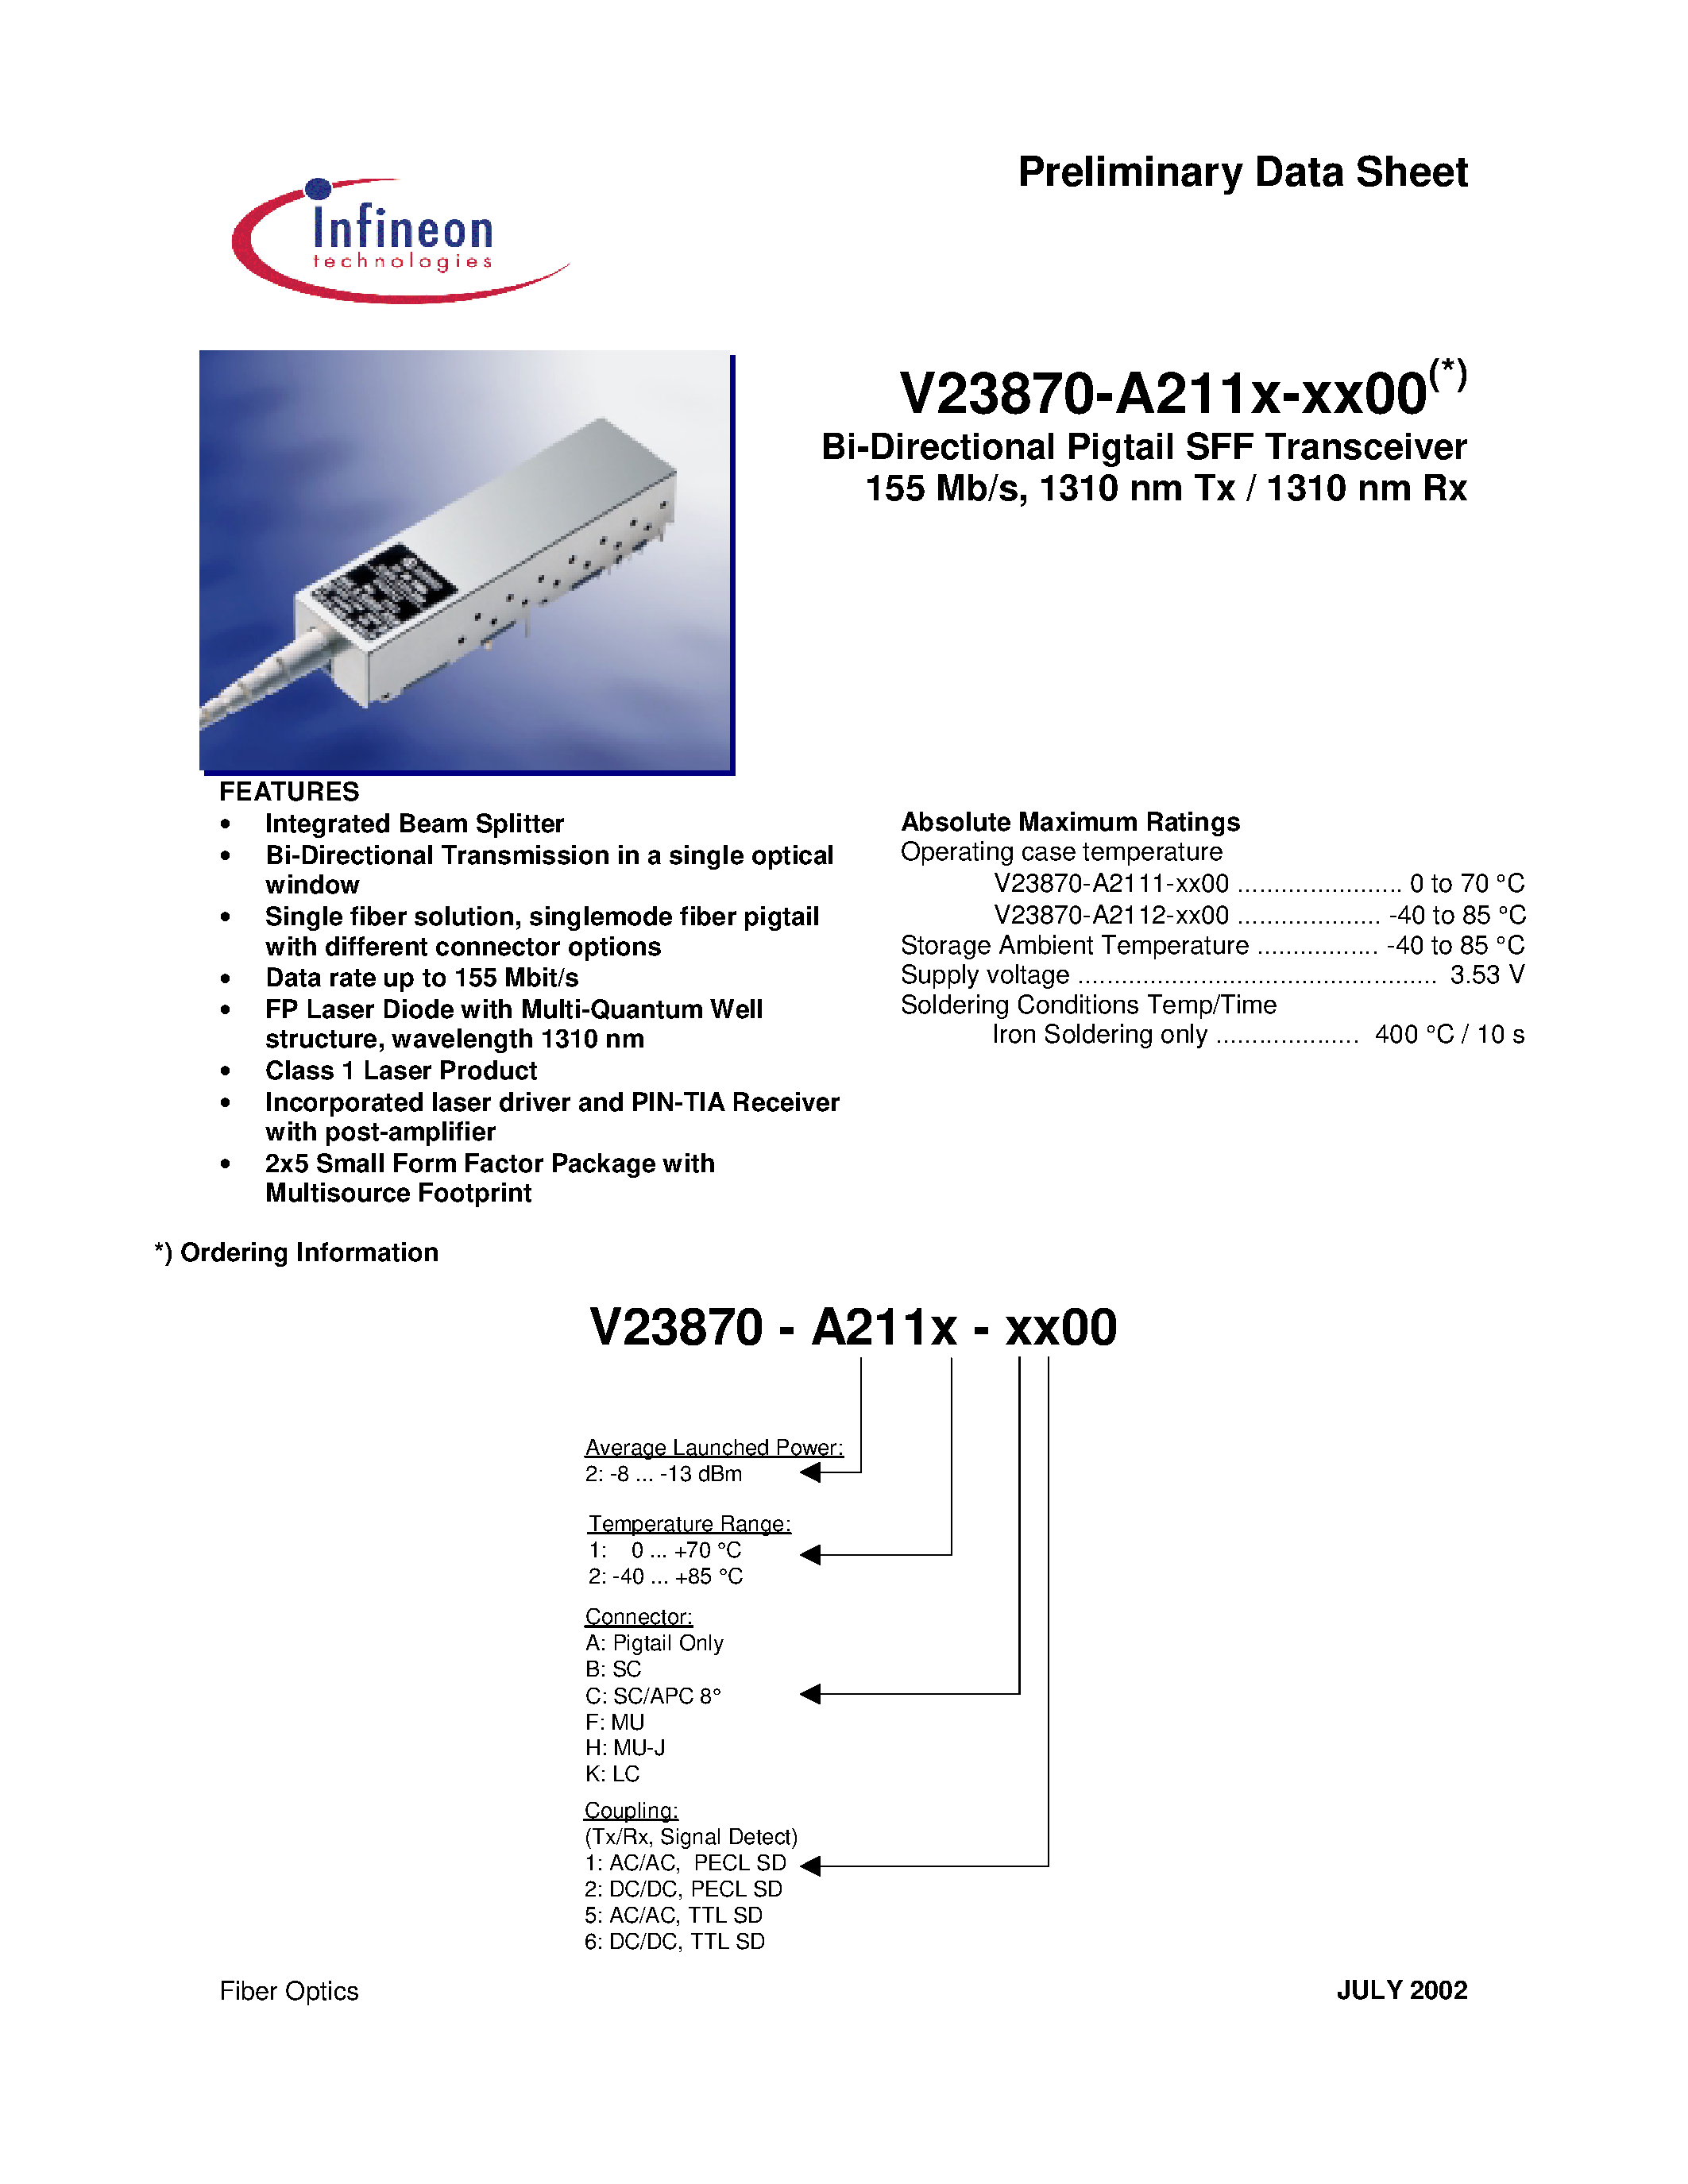 Datasheet V23870-A2112-F600 - Bi-Directional Pigtail SFF Transceiver 155 Mb/s/ 1310 nm Tx / 1310 nm Rx page 1